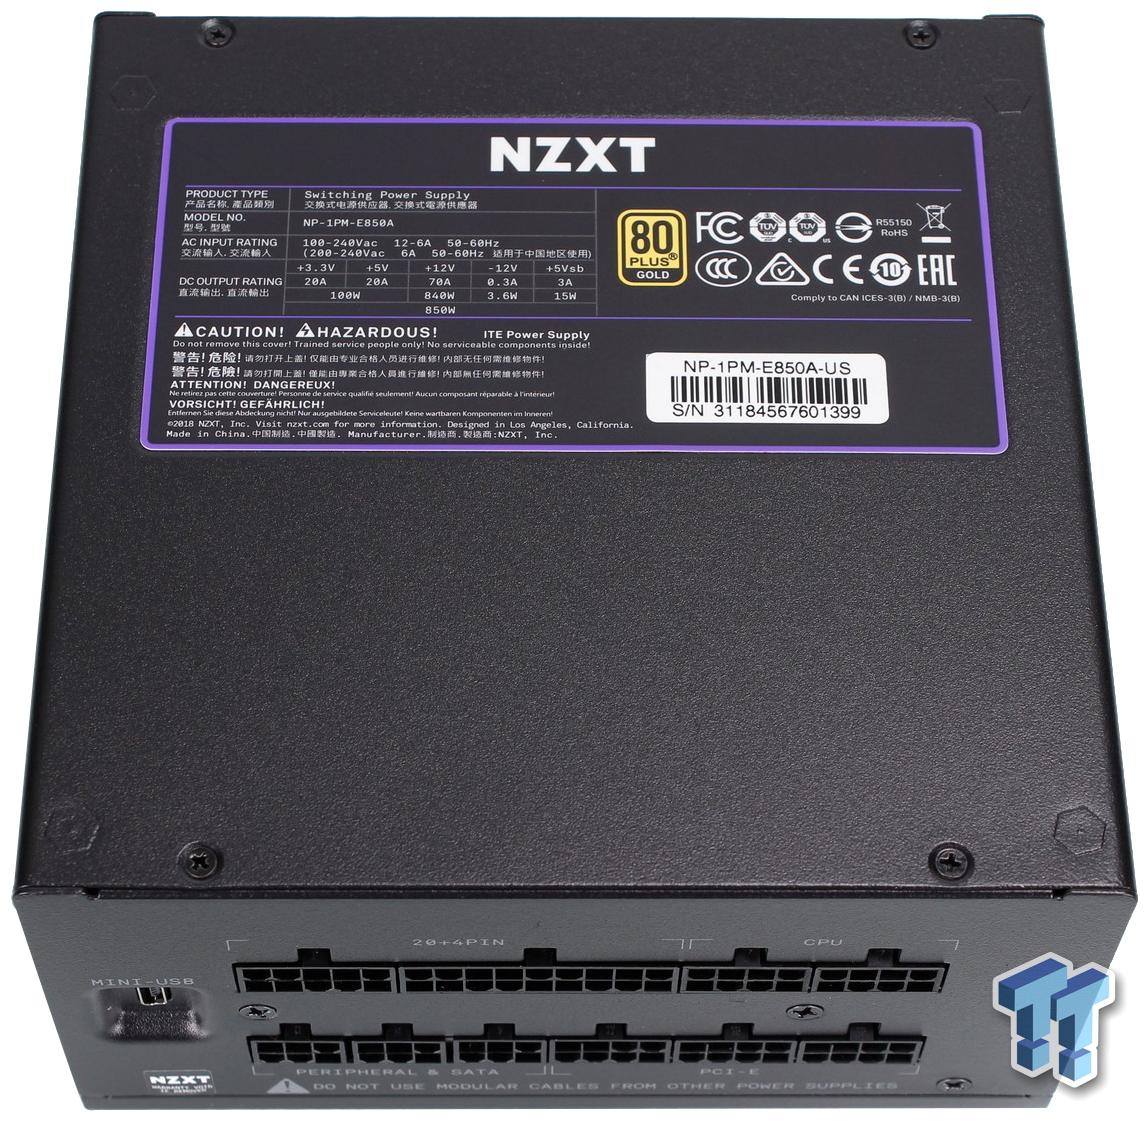 NZXT E850 850W Gold Digital ATX Power Supply Review